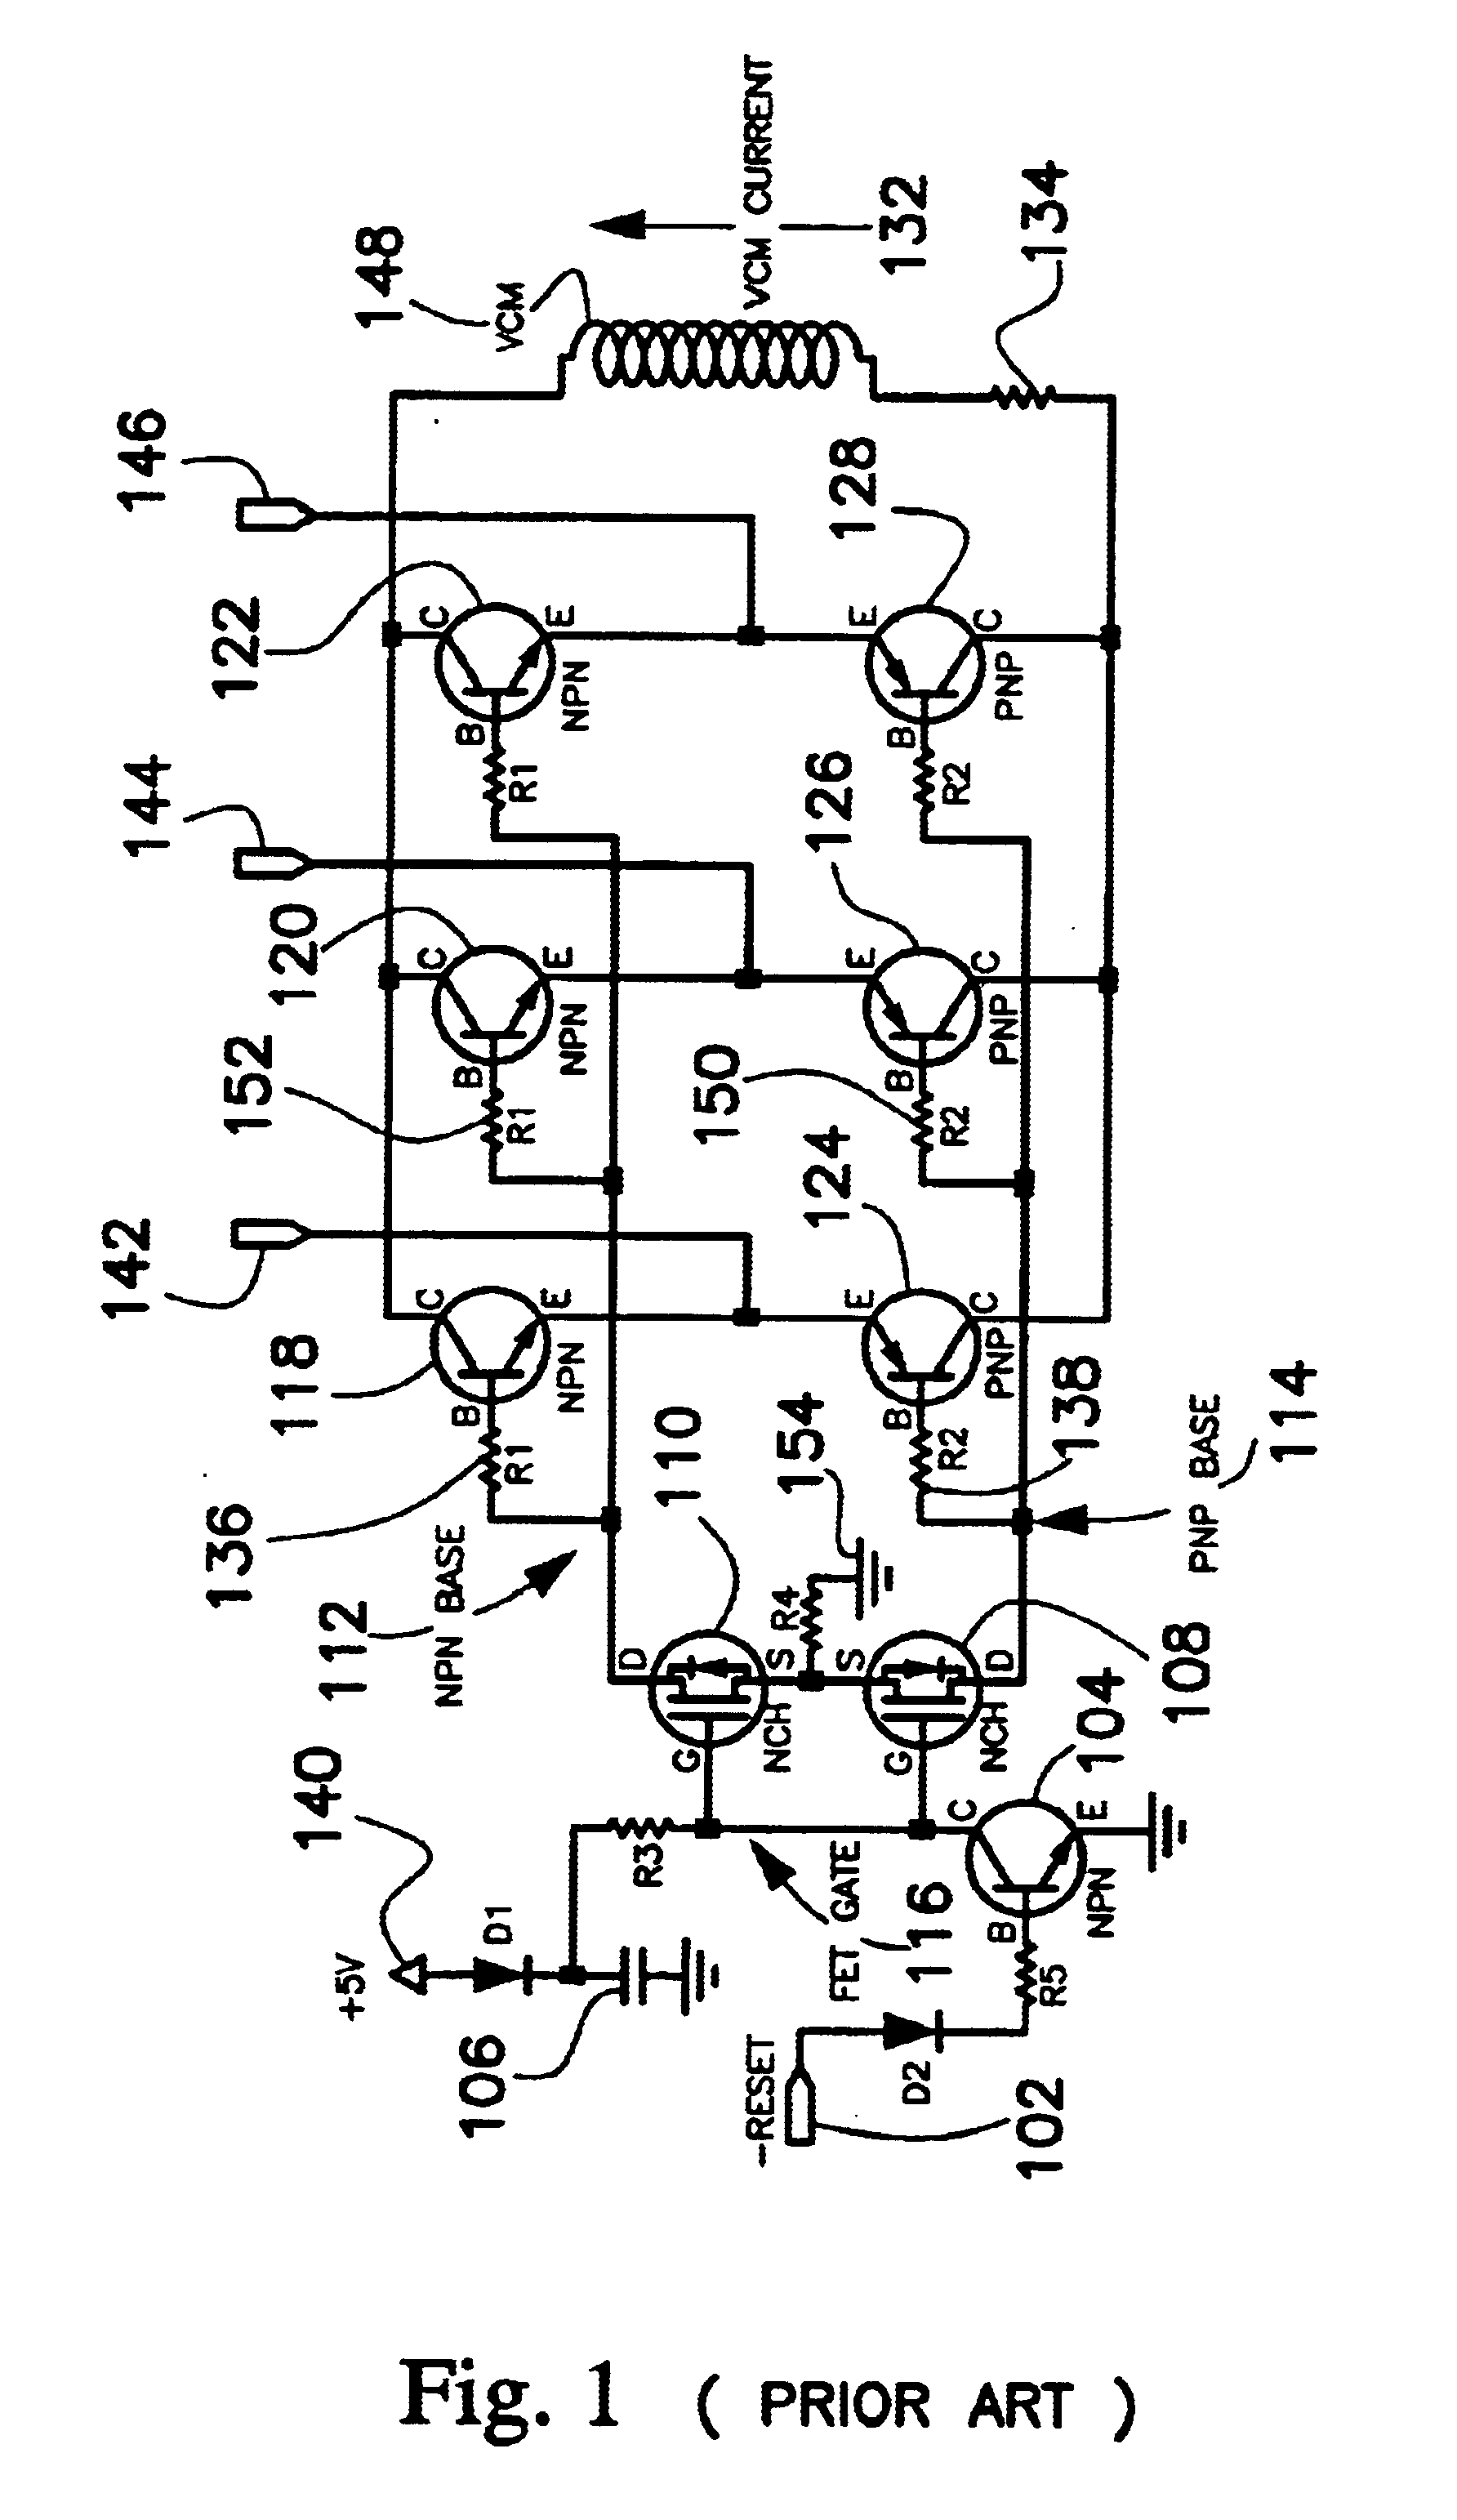 Actuator retract circuit for dual speed hard disk drive